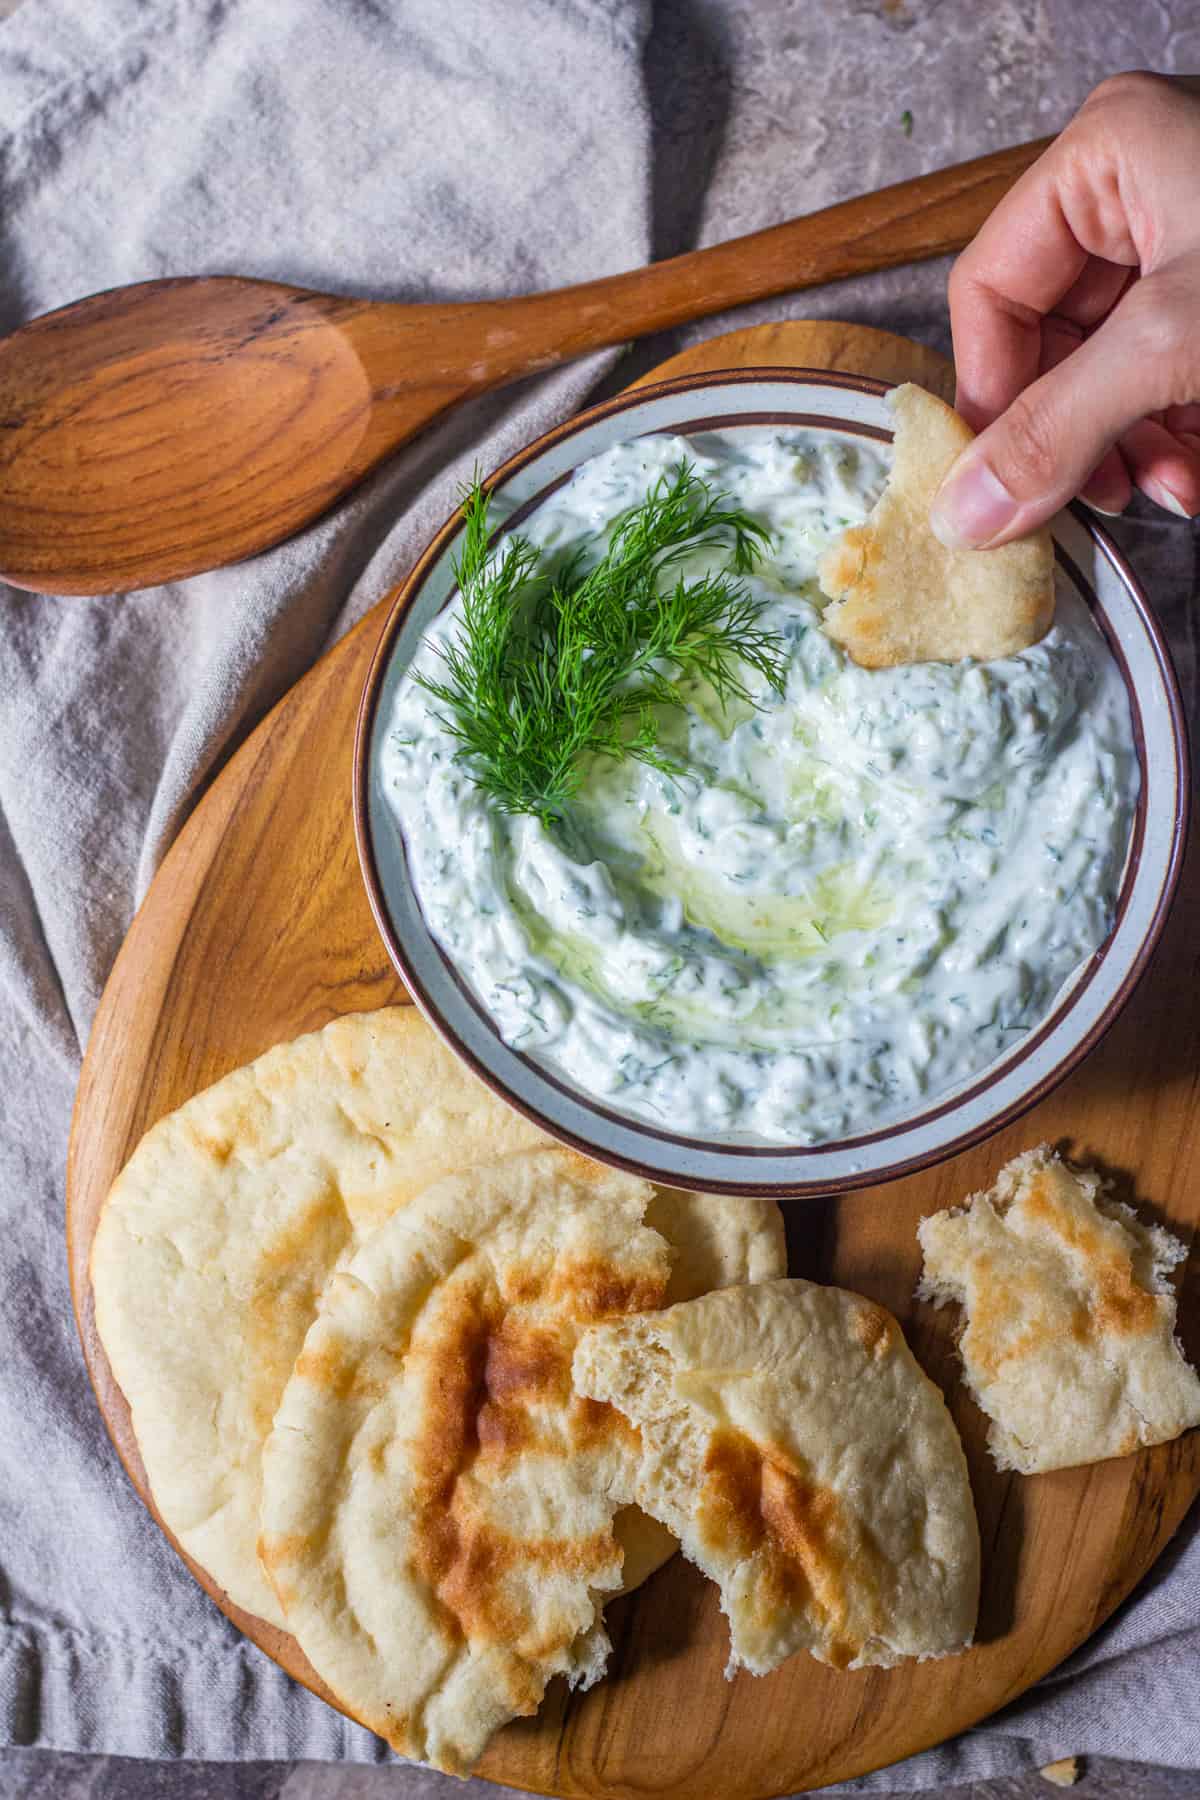 This classic tzatziki recipe is made with just a few ingredients and will be ready in only 10 minutes. It's perfect for vegetables, meat, or simply as a dip. Check out our video and step-by-step tutorial.
